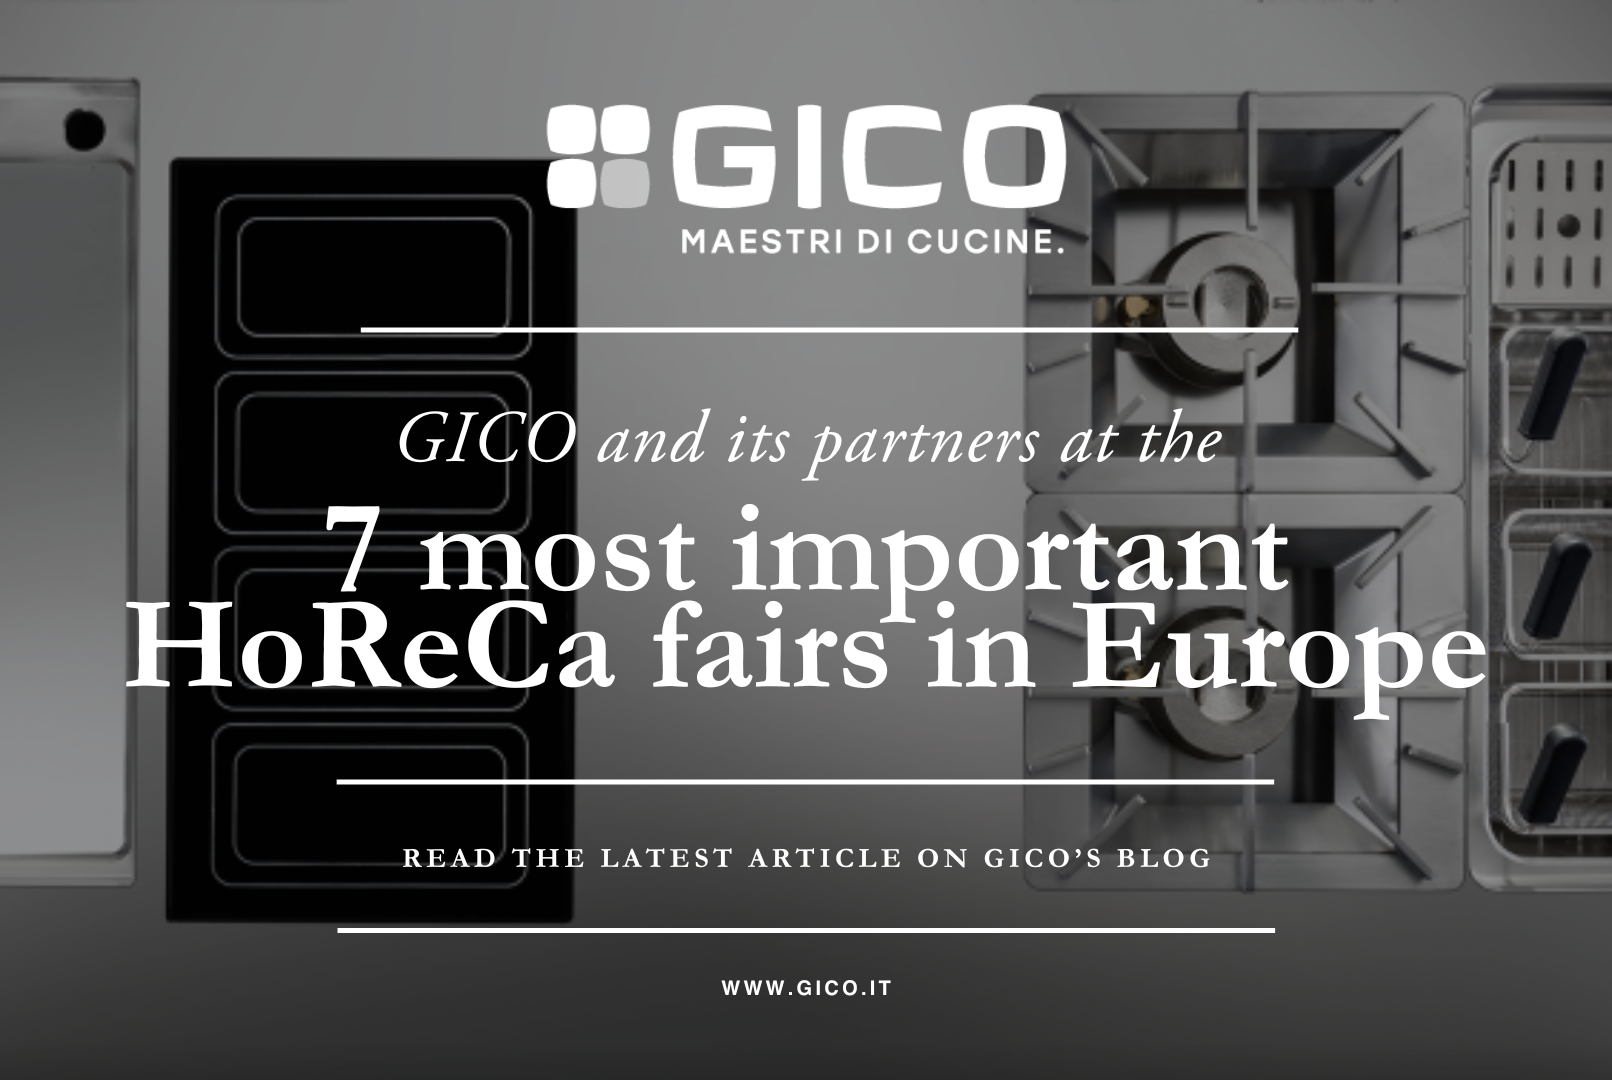 Gico alongside its partners in the 7 most important european Horeca events